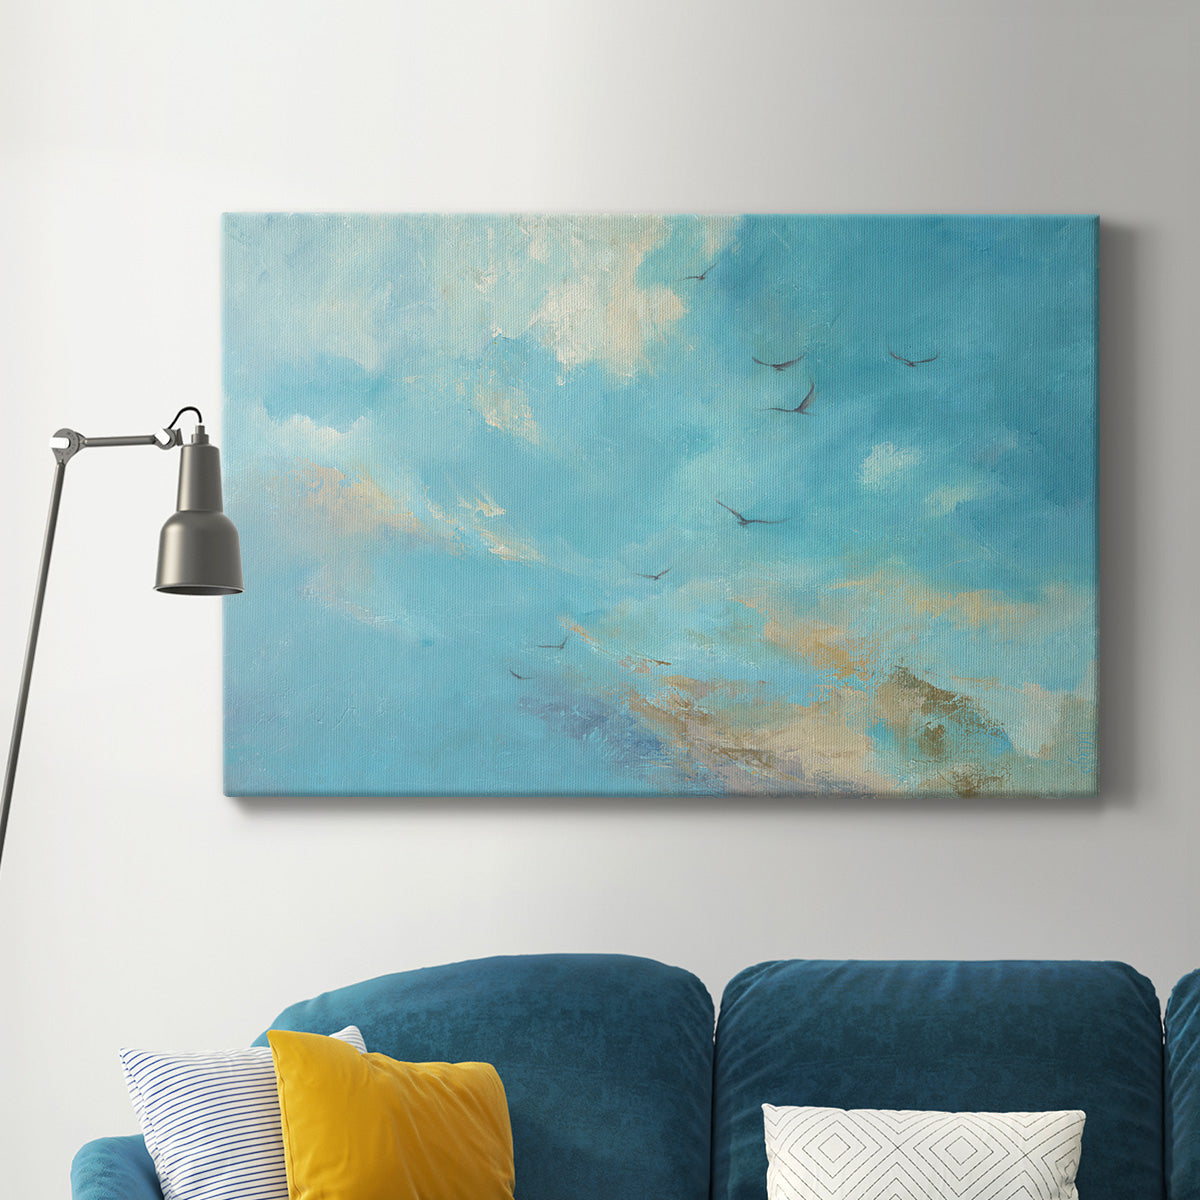 I'll Fly Away Premium Gallery Wrapped Canvas - Ready to Hang